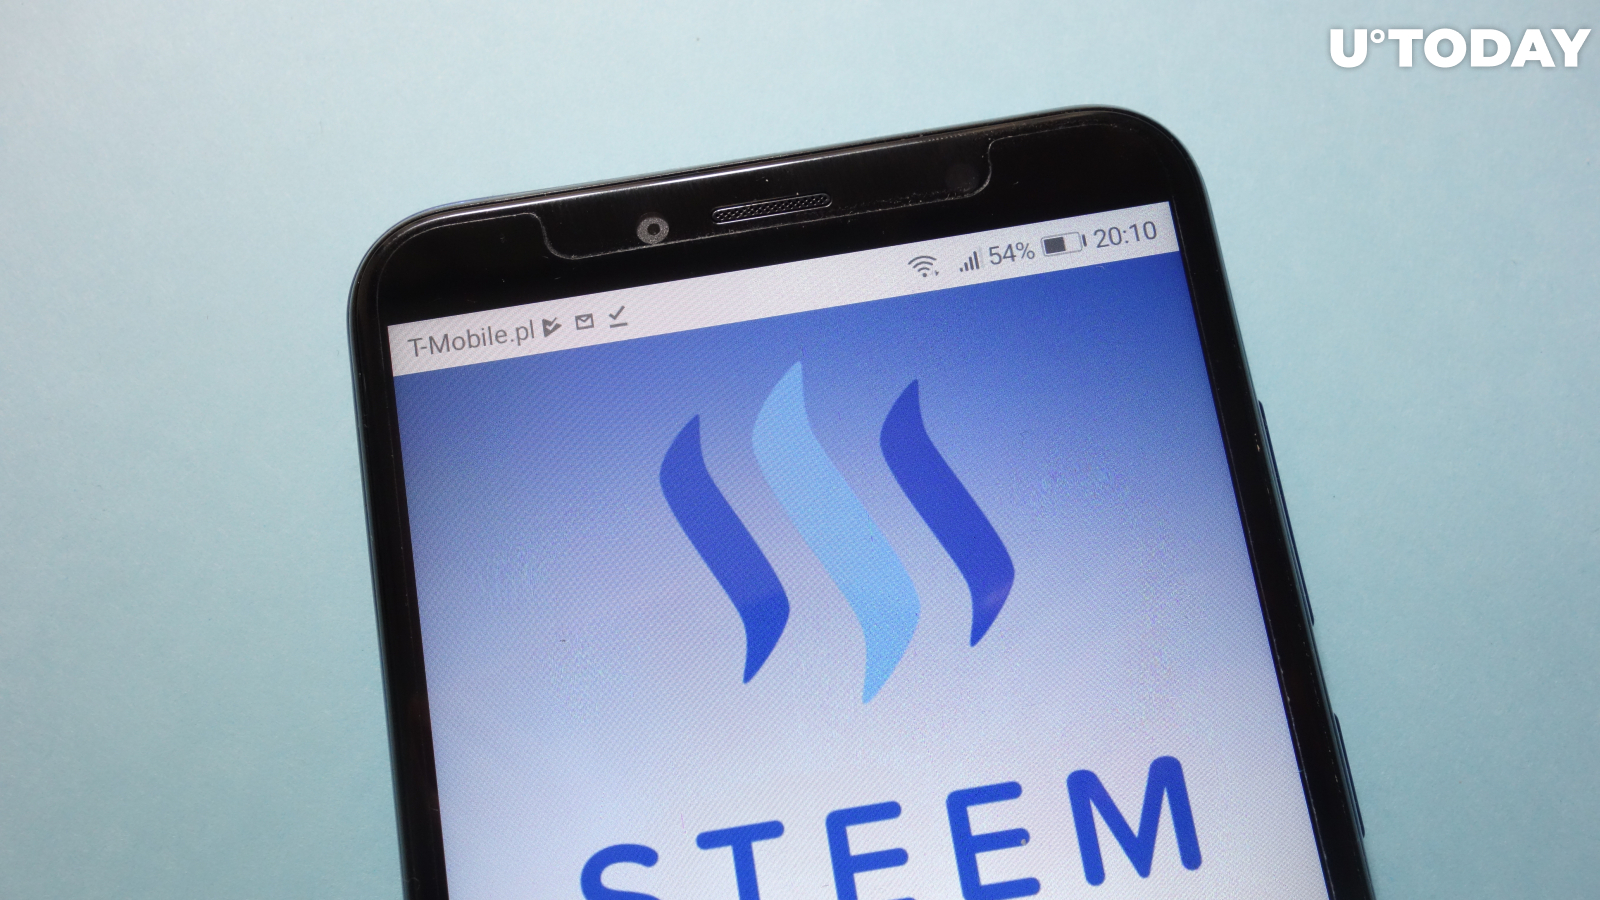 Steem (STEEM) Token Suddenly Surges 40 Percent. Here's Why